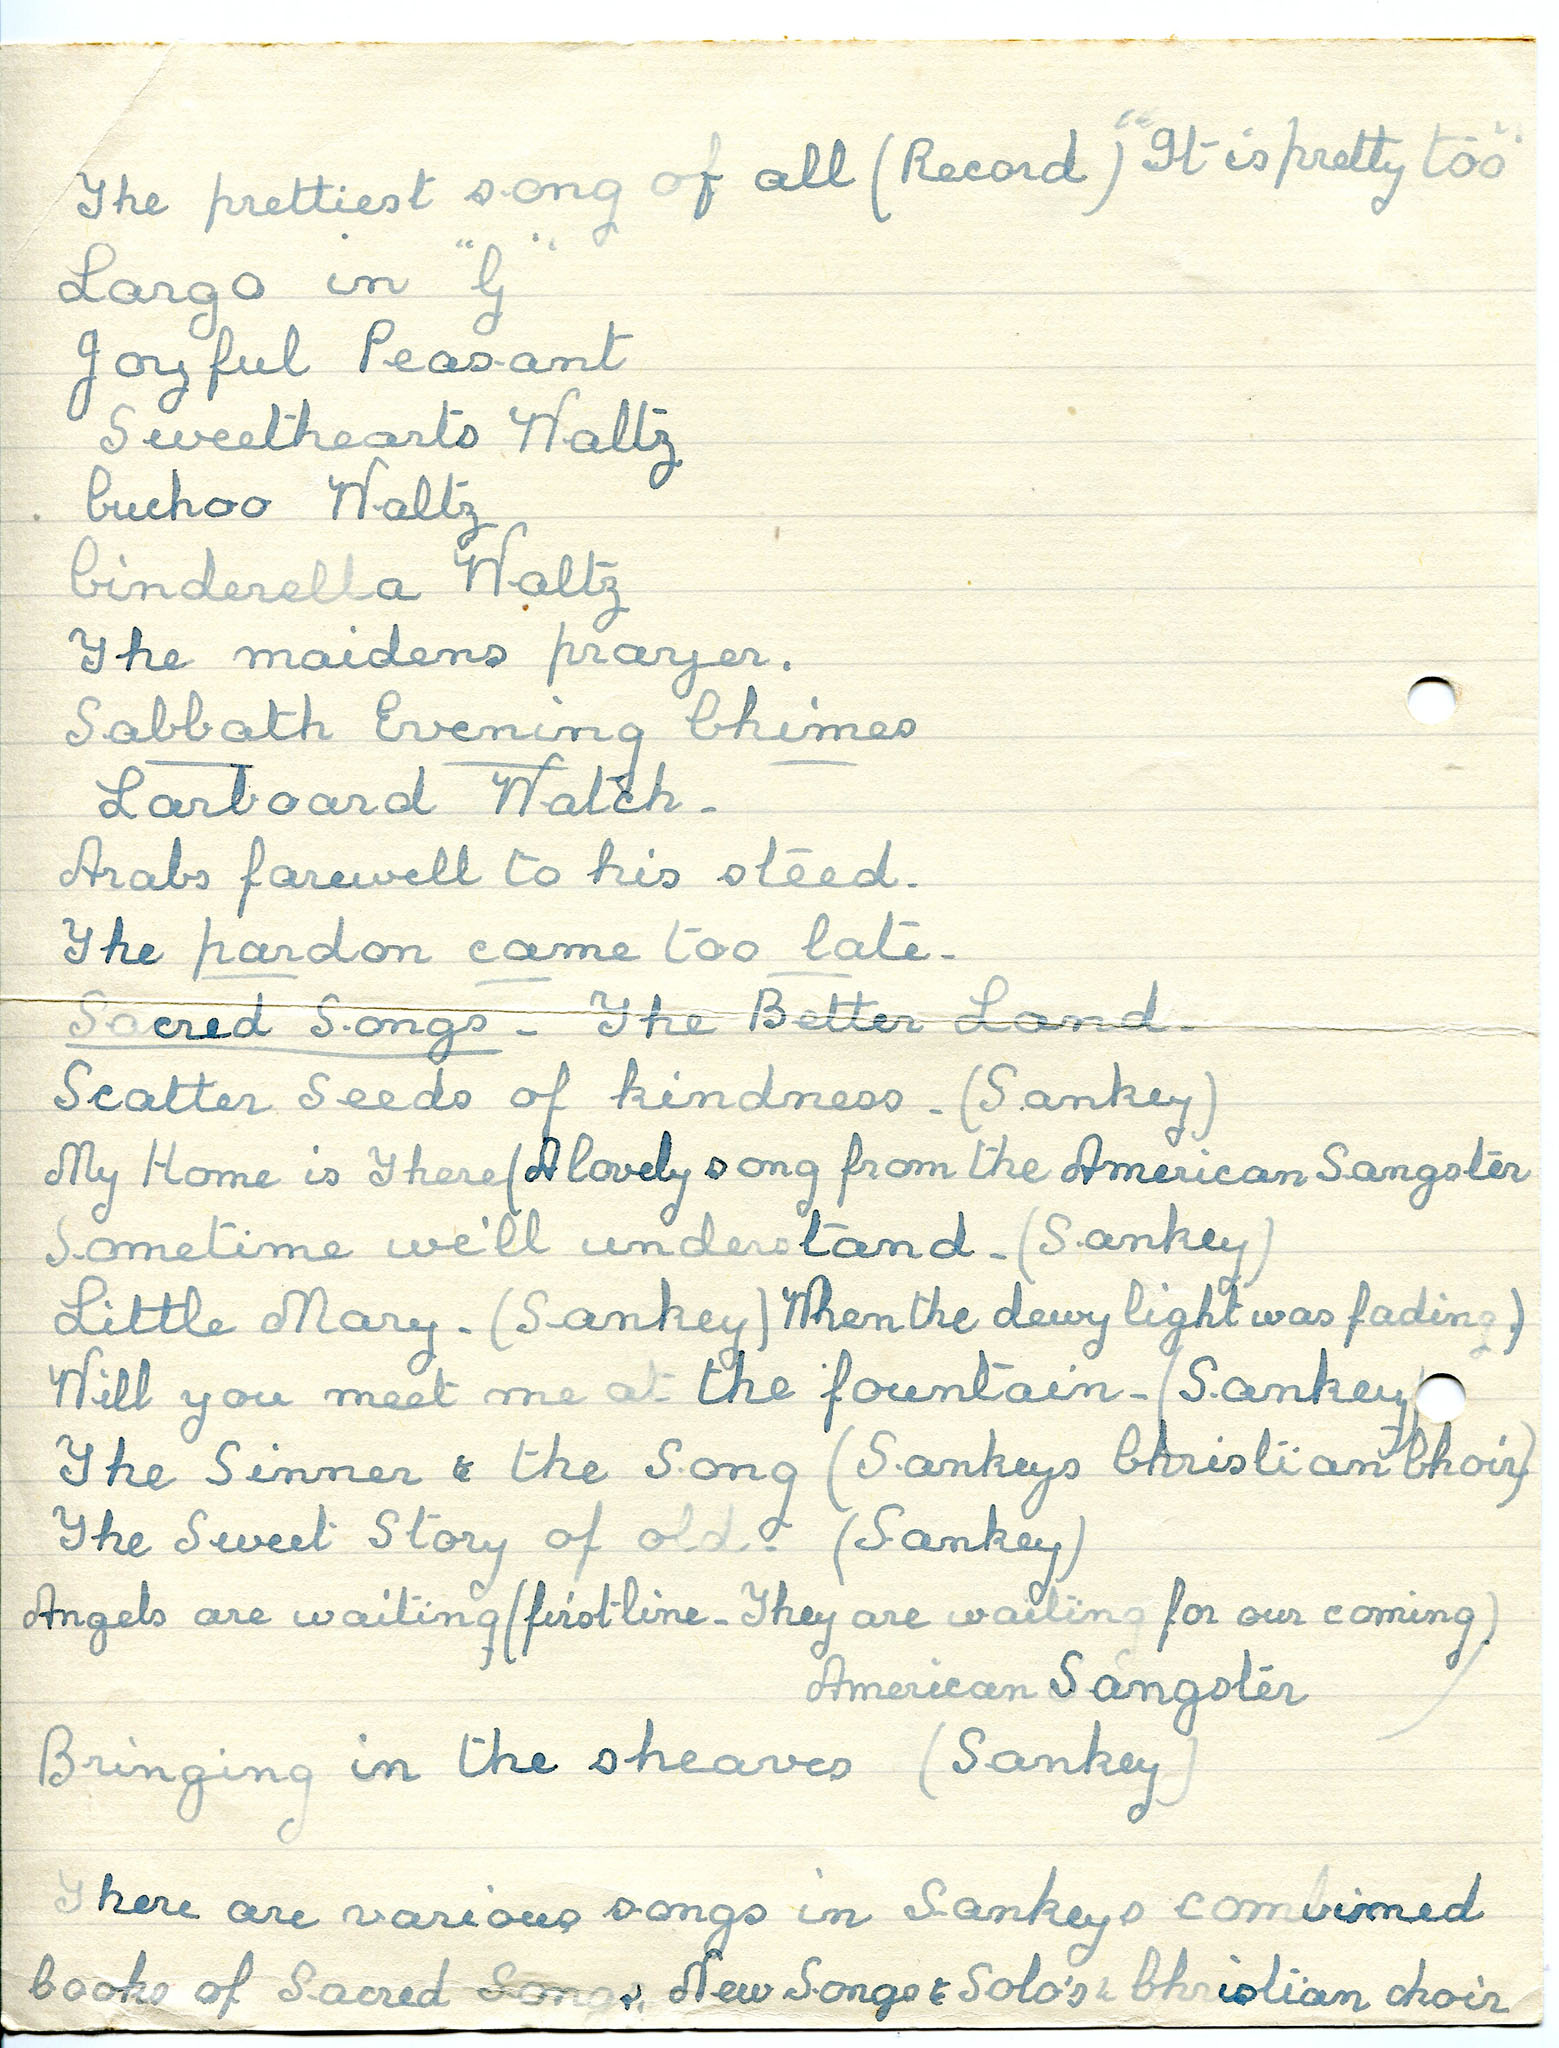 One of 3 pages of handwritten letter, with list of song titles and ...